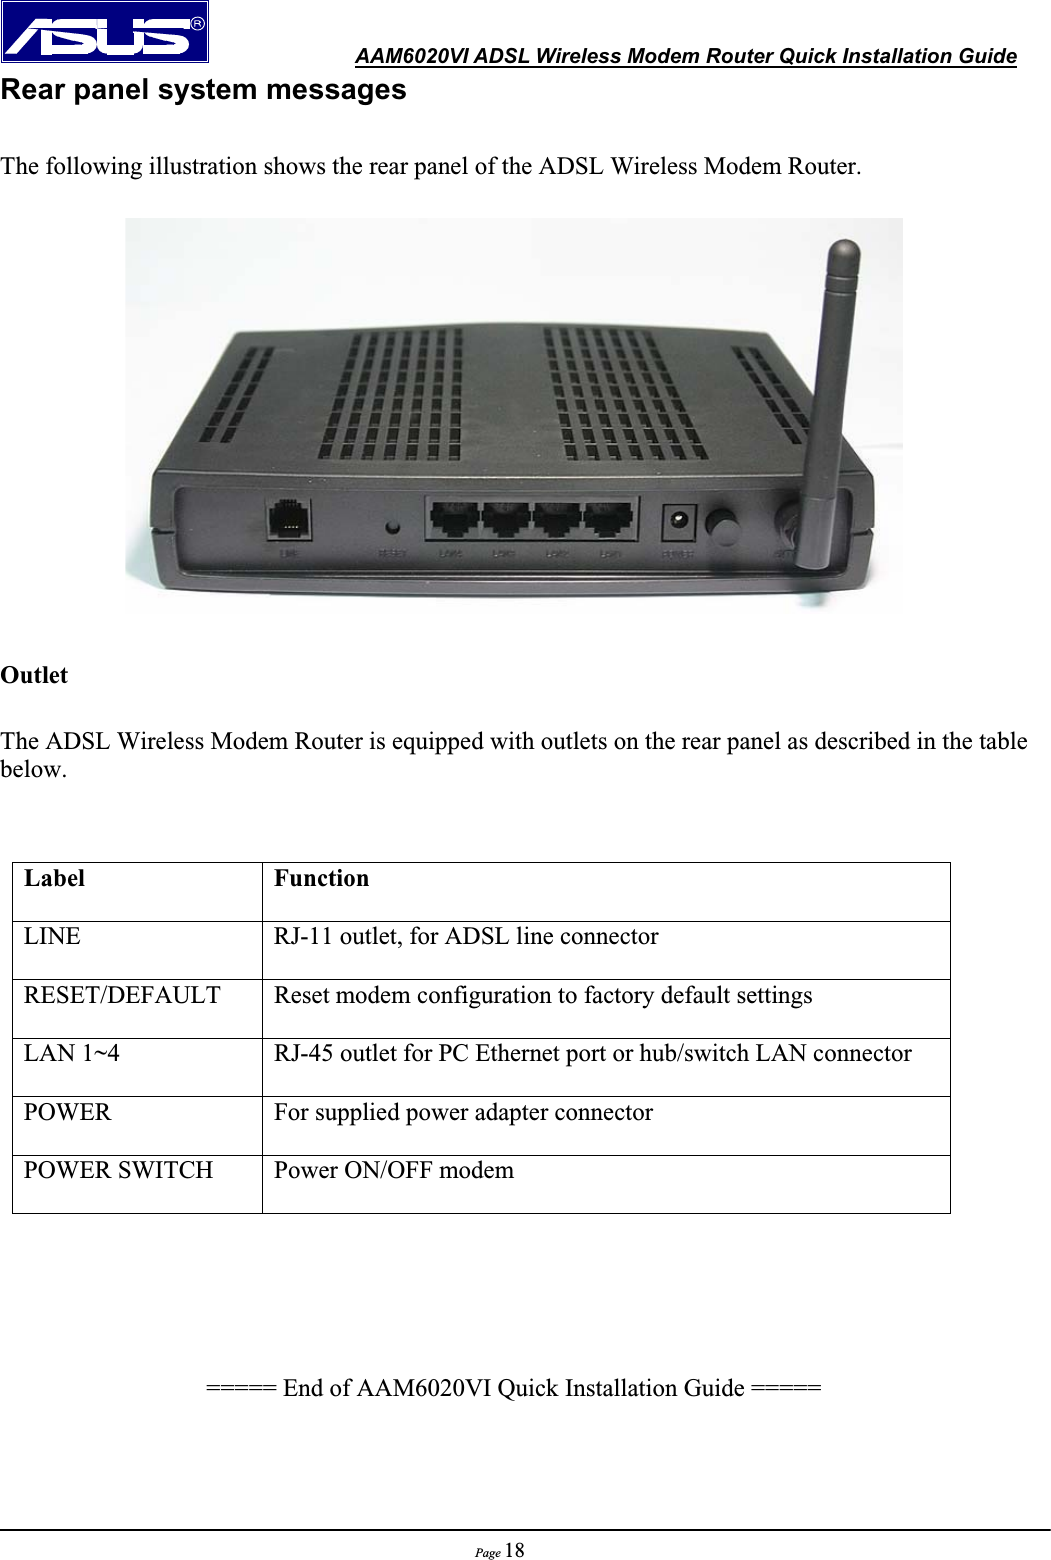               AAM6020VI ADSL Wireless Modem Router Quick Installation GuidePage 18Rear panel system messages The following illustration shows the rear panel of the ADSL Wireless Modem Router. Outlet The ADSL Wireless Modem Router is equipped with outlets on the rear panel as described in the table below.Label Function LINE  RJ-11 outlet, for ADSL line connector RESET/DEFAULT Reset modem configuration to factory default settings LAN 1~4  RJ-45 outlet for PC Ethernet port or hub/switch LAN connector POWER For supplied power adapter connector POWER SWITCH  Power ON/OFF modem ===== End of AAM6020VI Quick Installation Guide ===== 